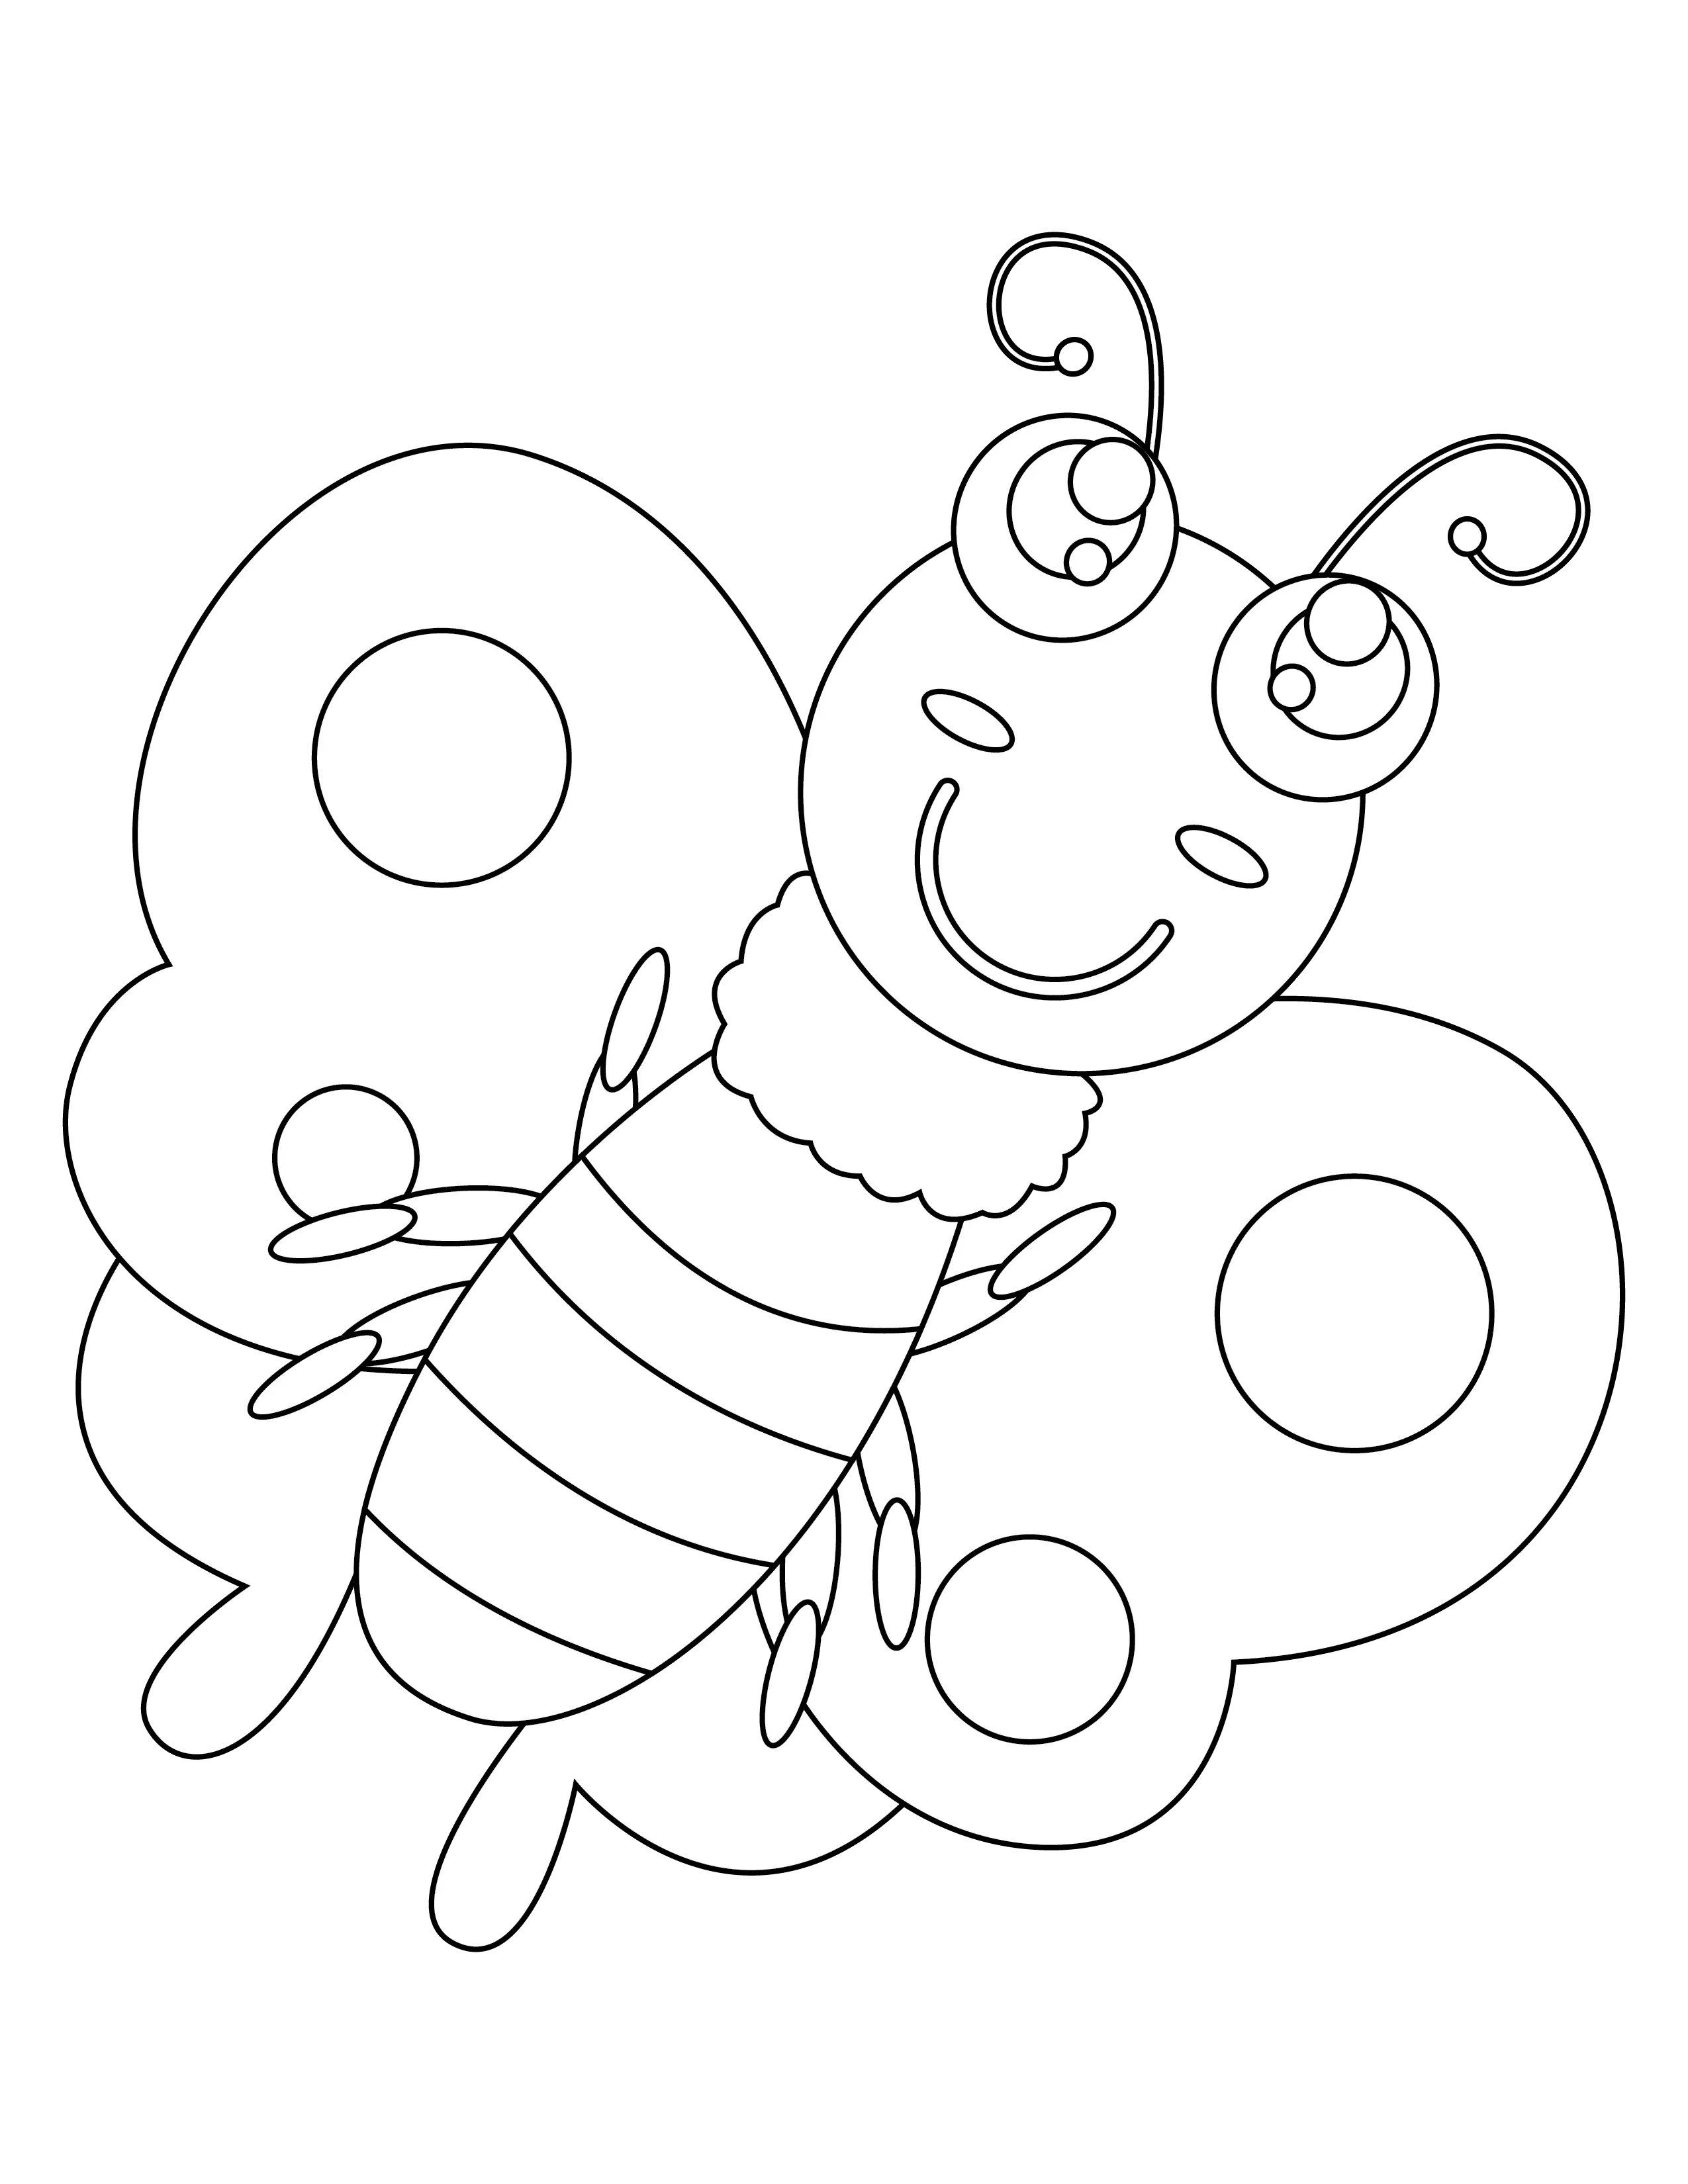 CUTE-butterfly-coloring-page-insect-for-kids-outline-doodle-illustration-printable